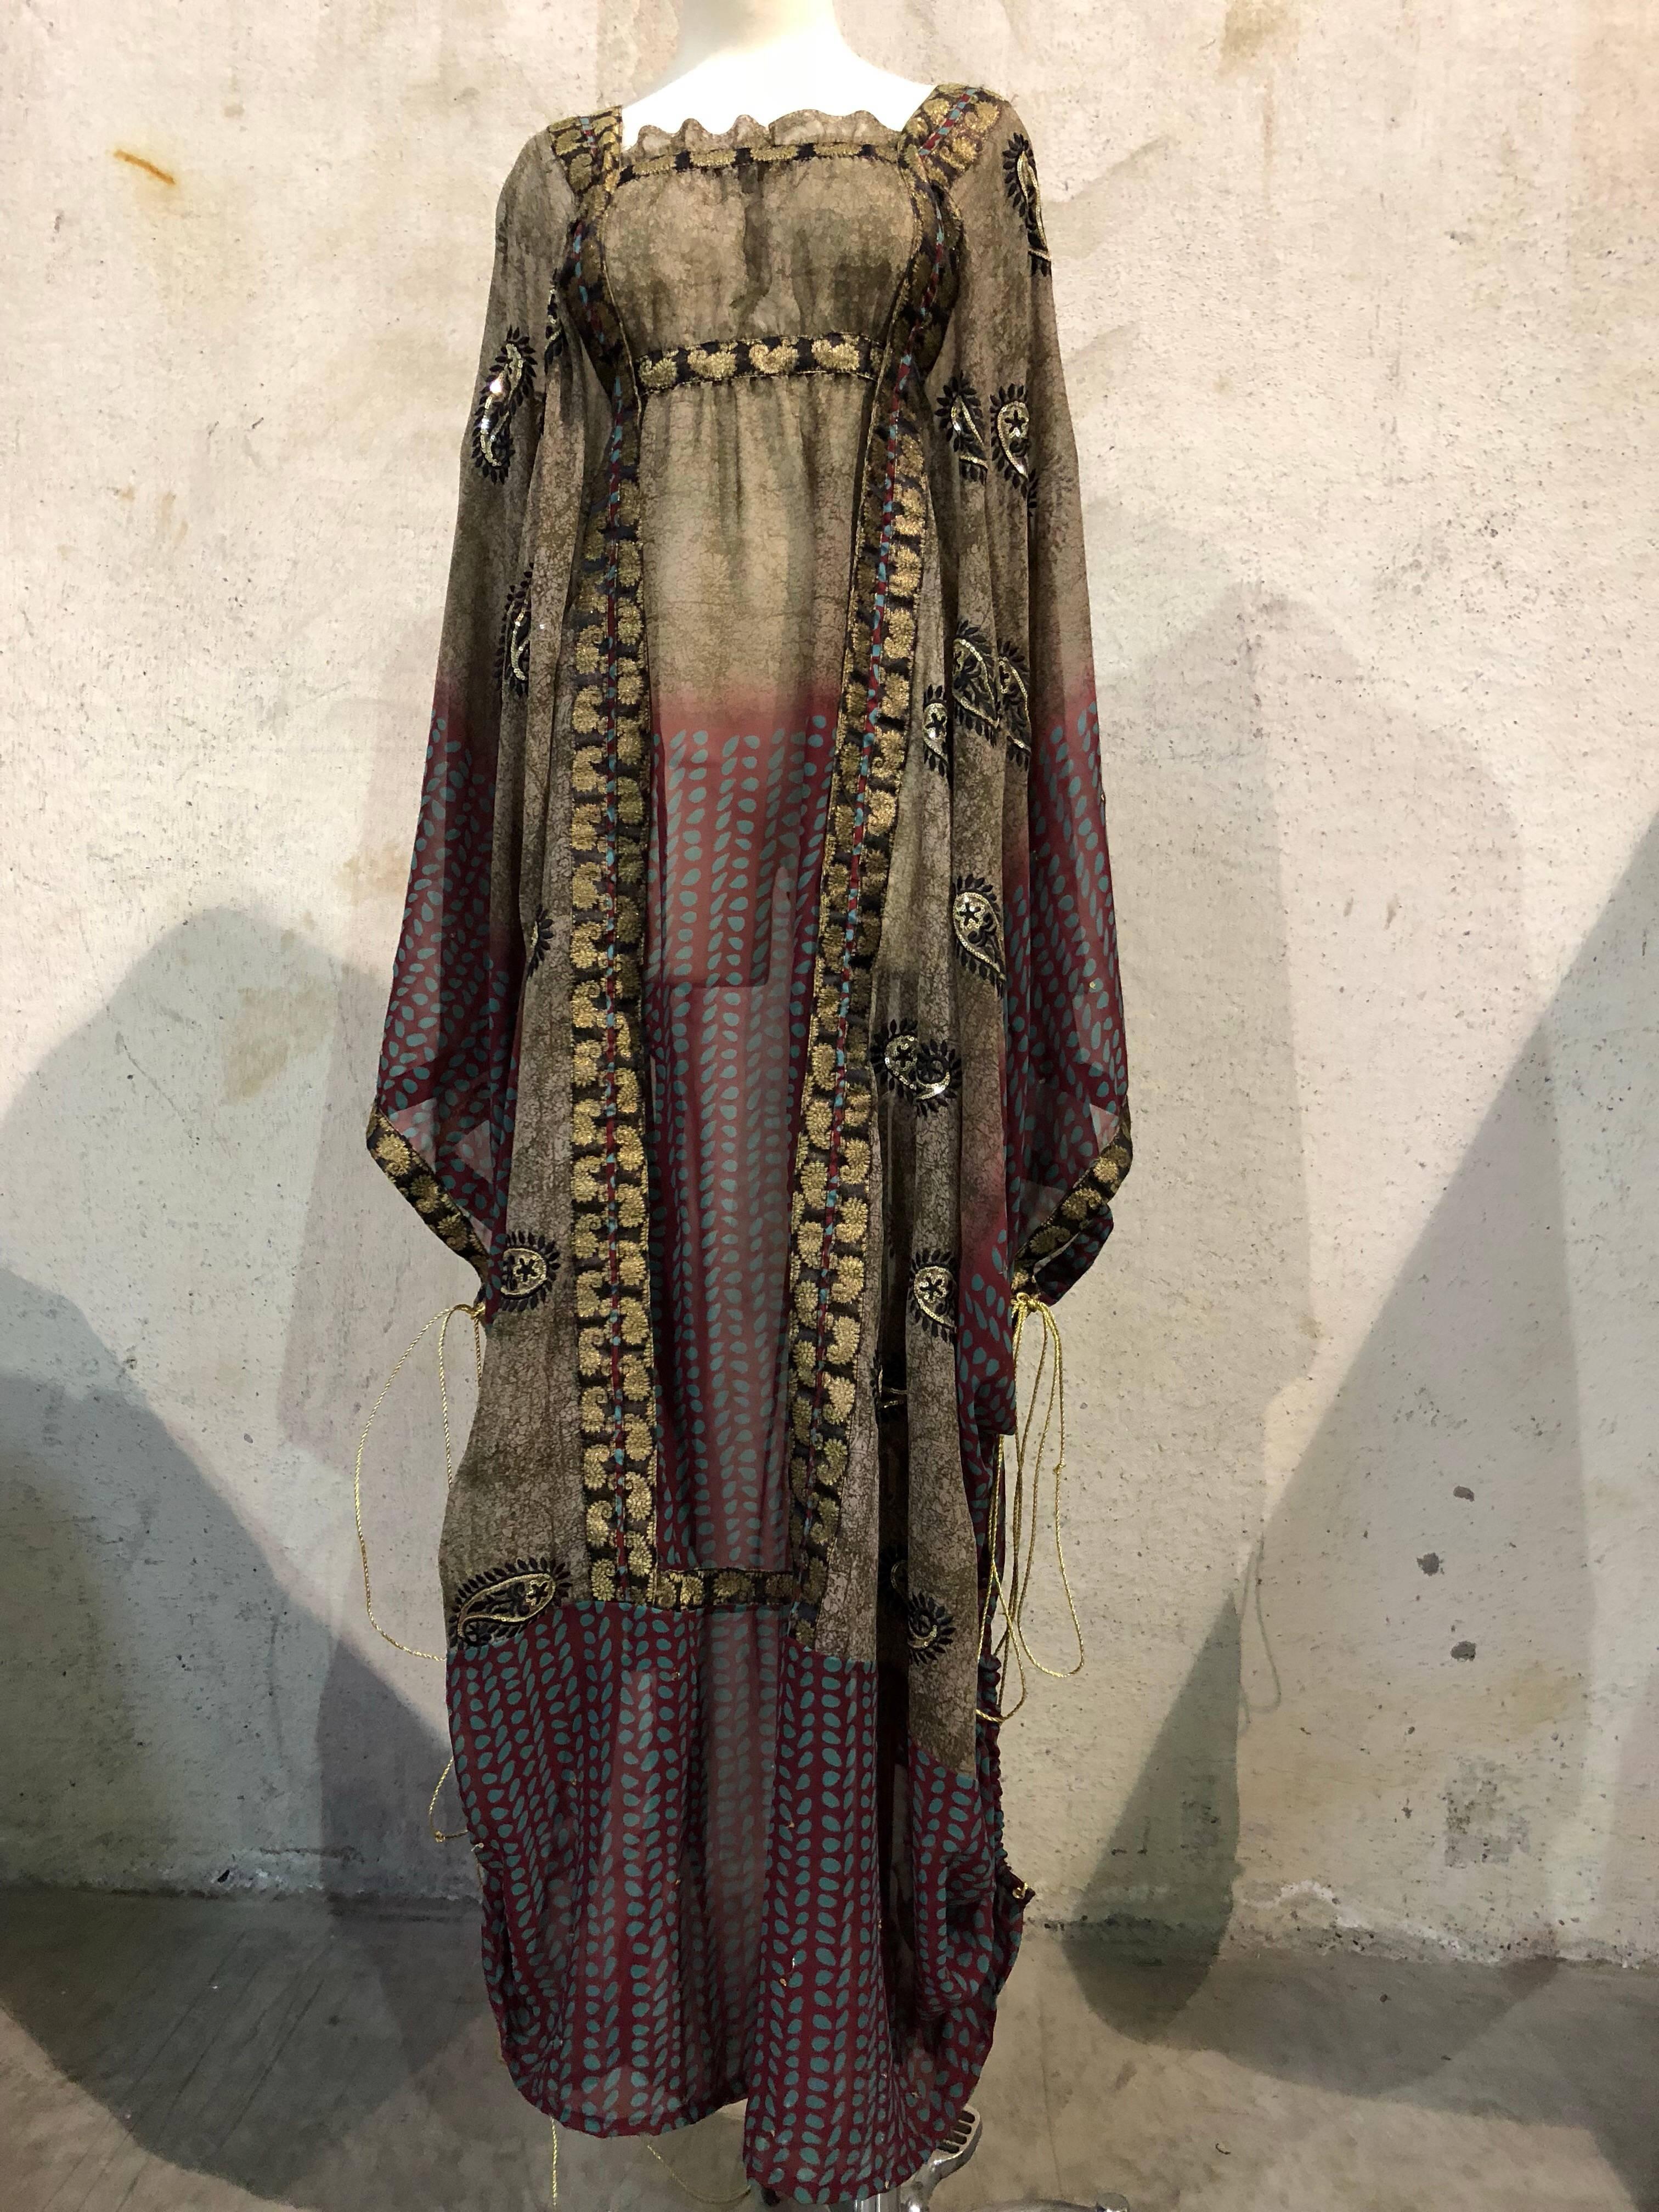 Custom-made Thea Porter-inspired Kaftan: Constructed of vintage beaded silk sari fabrics in gold, black and taupe.  Paisley designs. Empire waist with inner tie. 